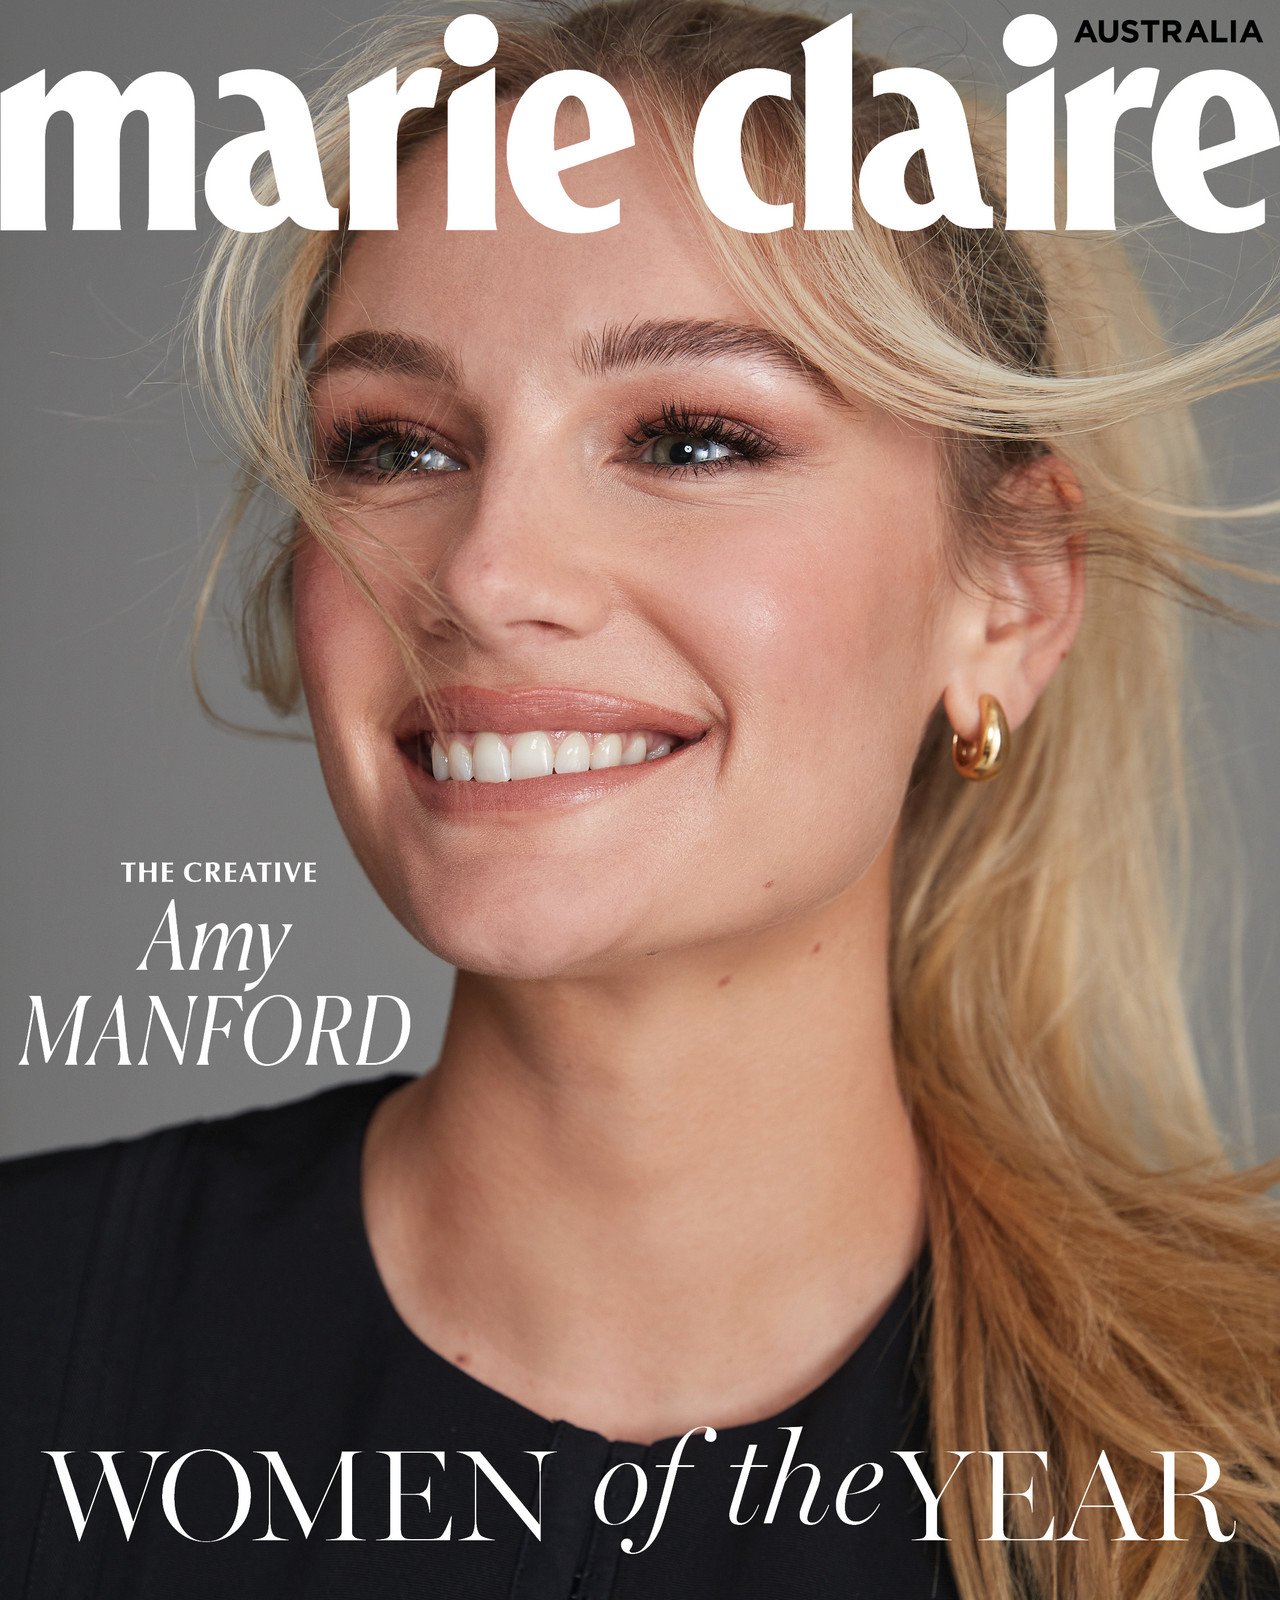 AMY MANFORD | WOMEN OF THE YEAR - MARIE CLAIRE AUSTRALIA